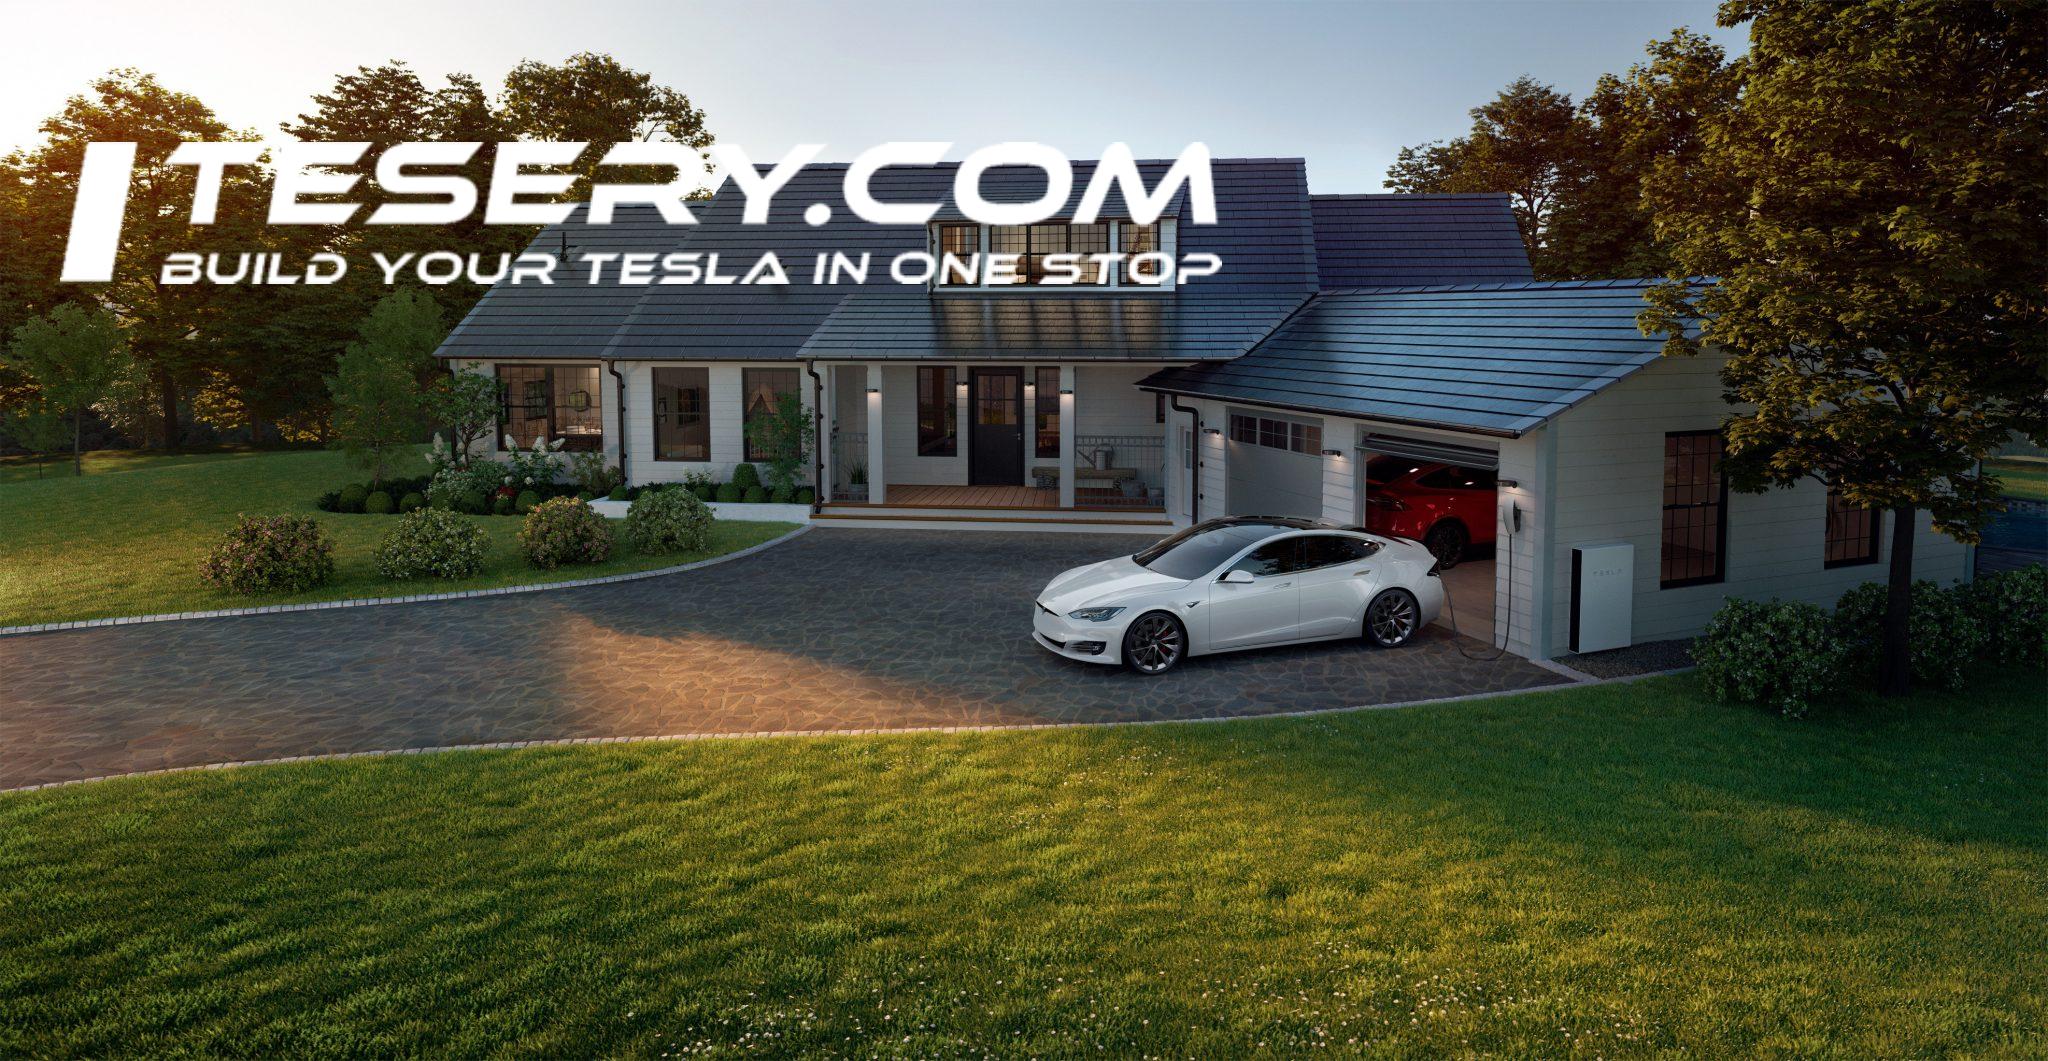 Tesla Solar Roof: The Niche Investment with Zero Power Bills - A Review by Marques Brownlee - Tesery Official Store